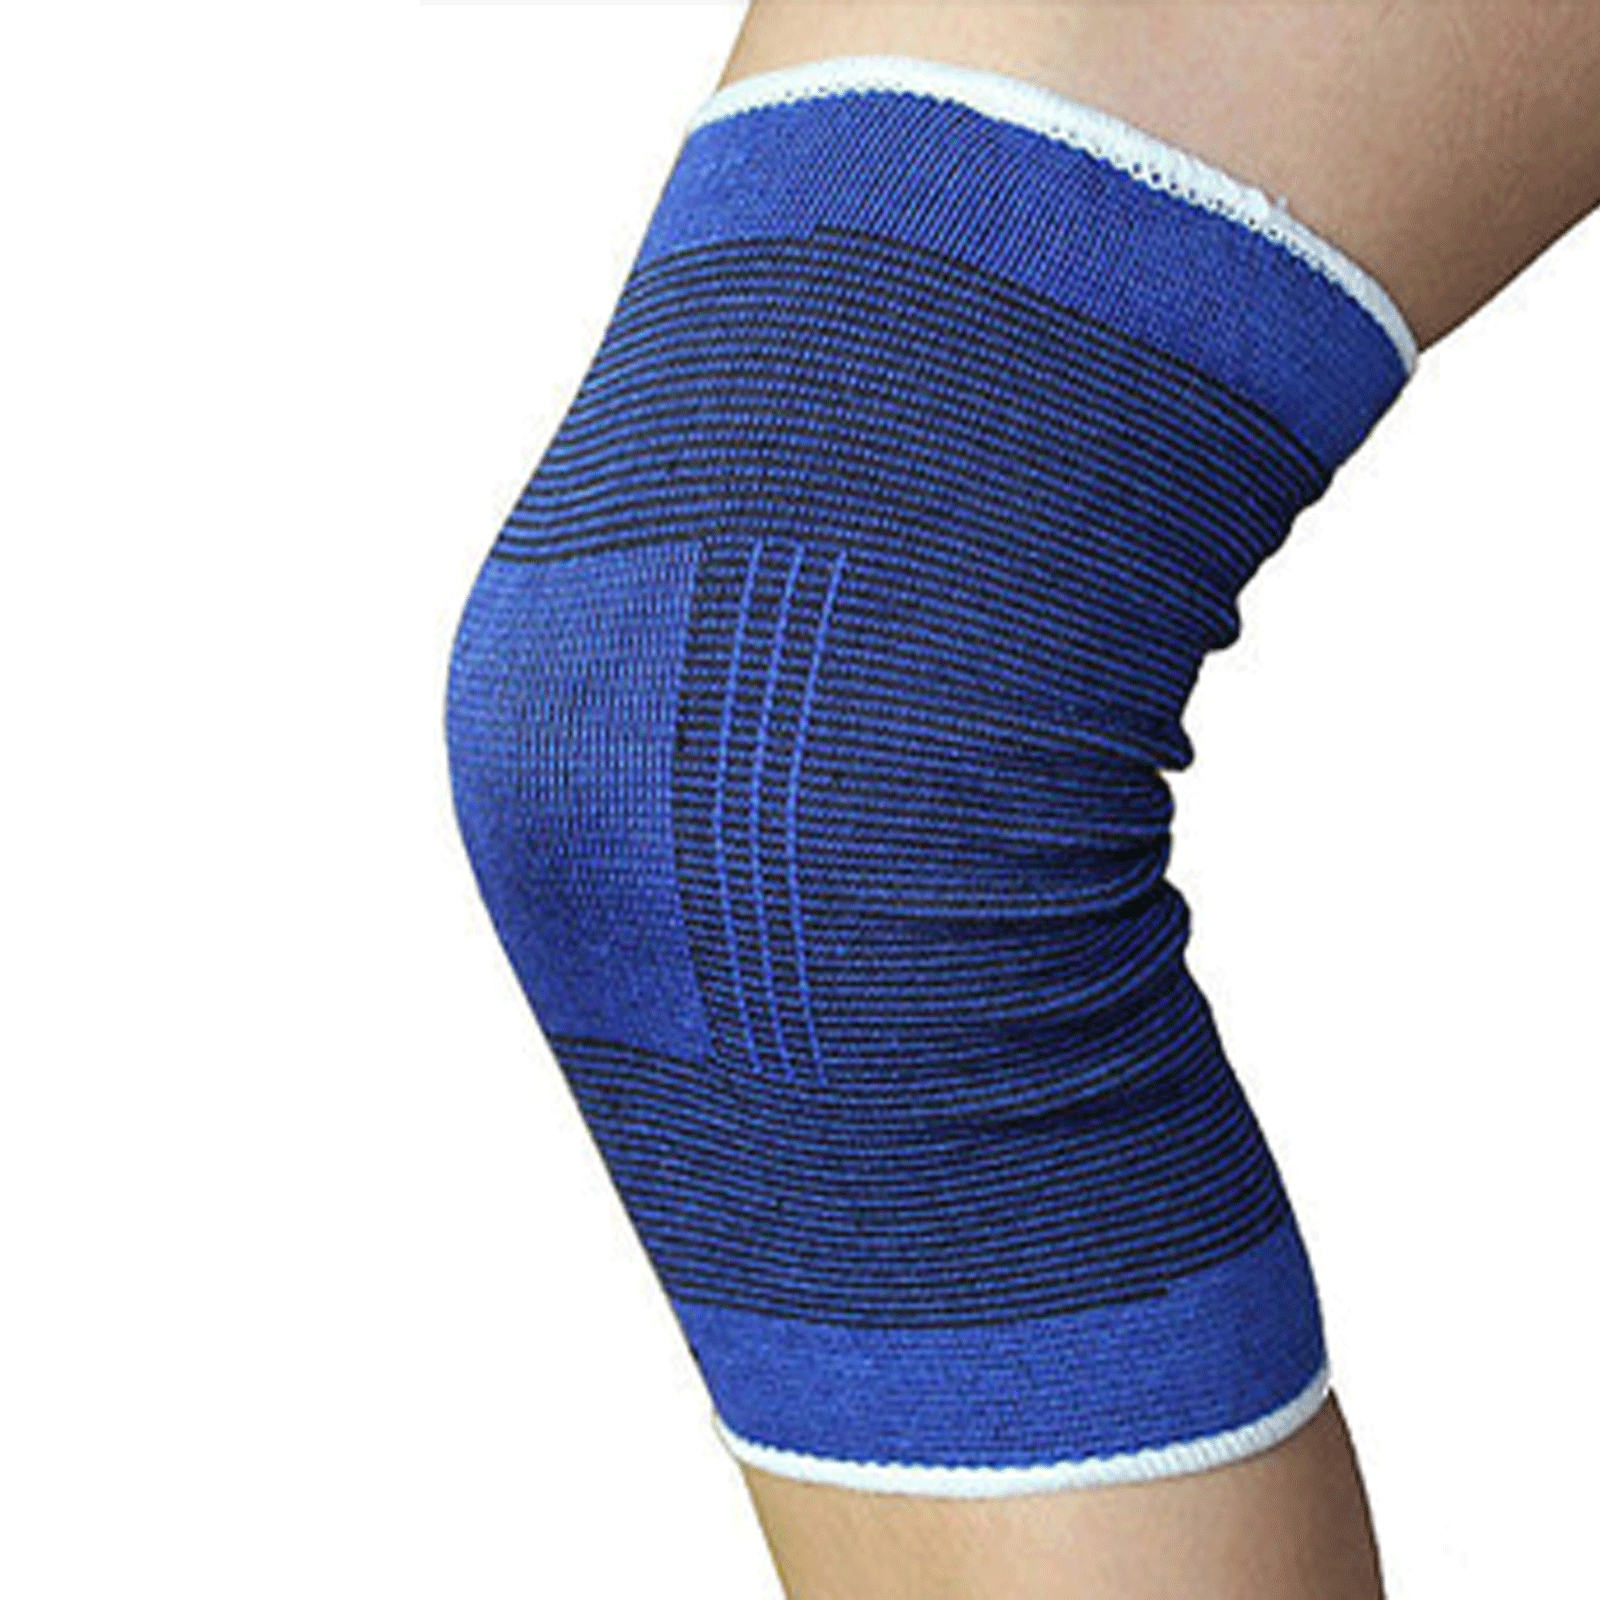 Knee Support Brace for knee pain relief